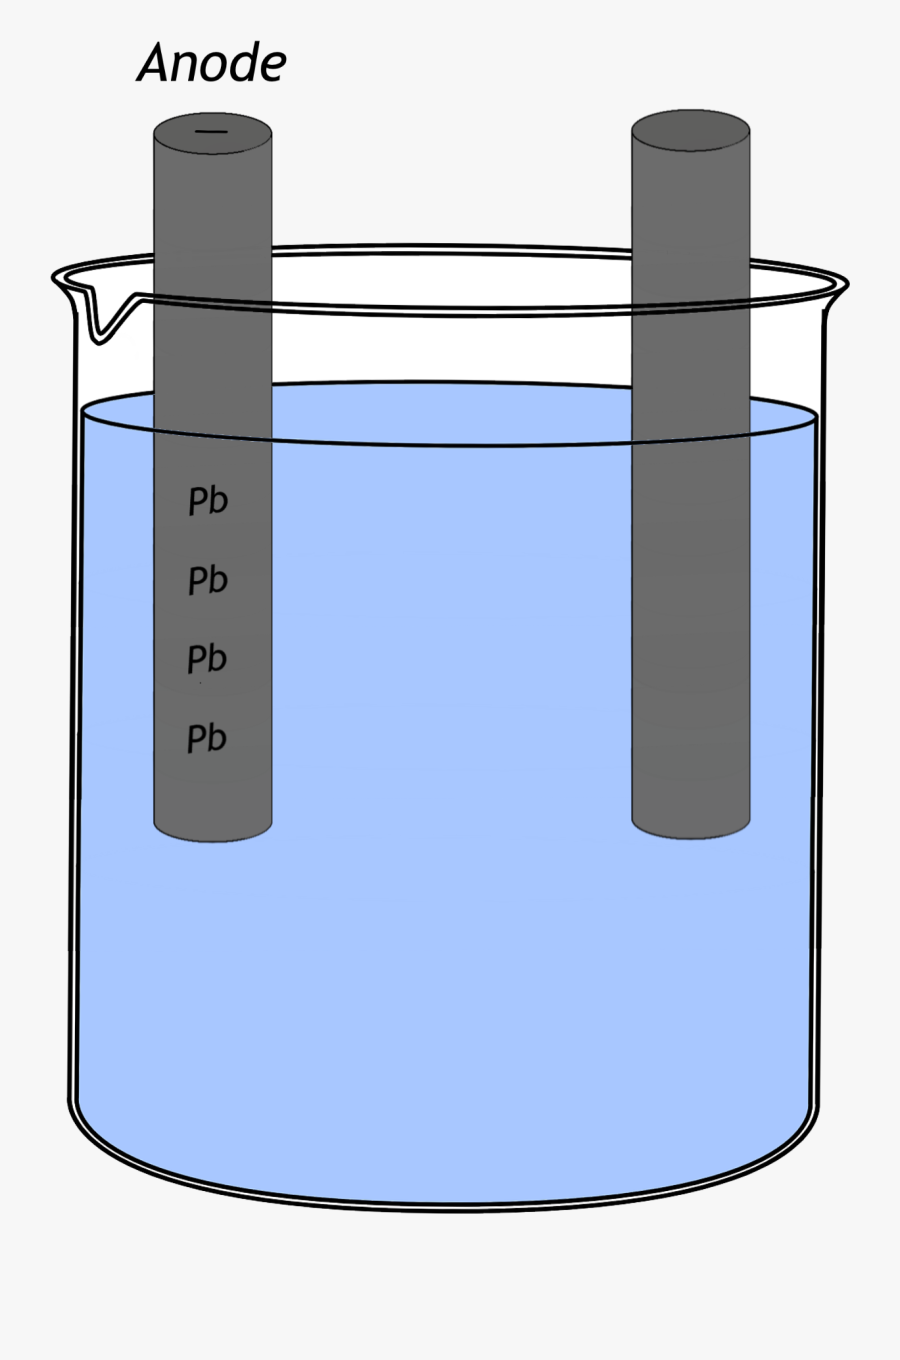 Chemistry Diagram Showing The Lead Composition Of The - Anode, Transparent Clipart